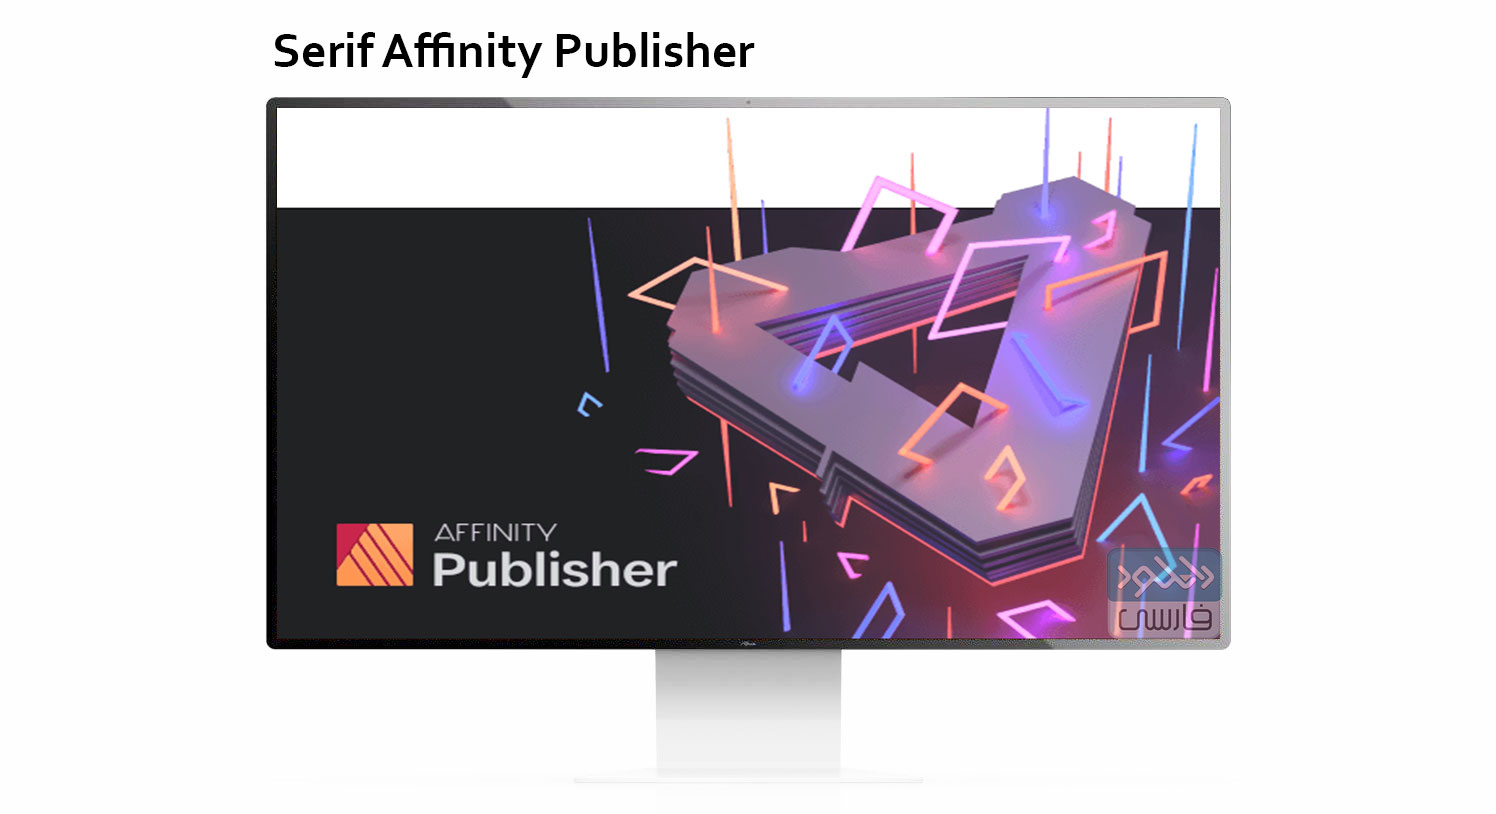 Serif Affinity Publisher 2.1.1.1847 download the new version